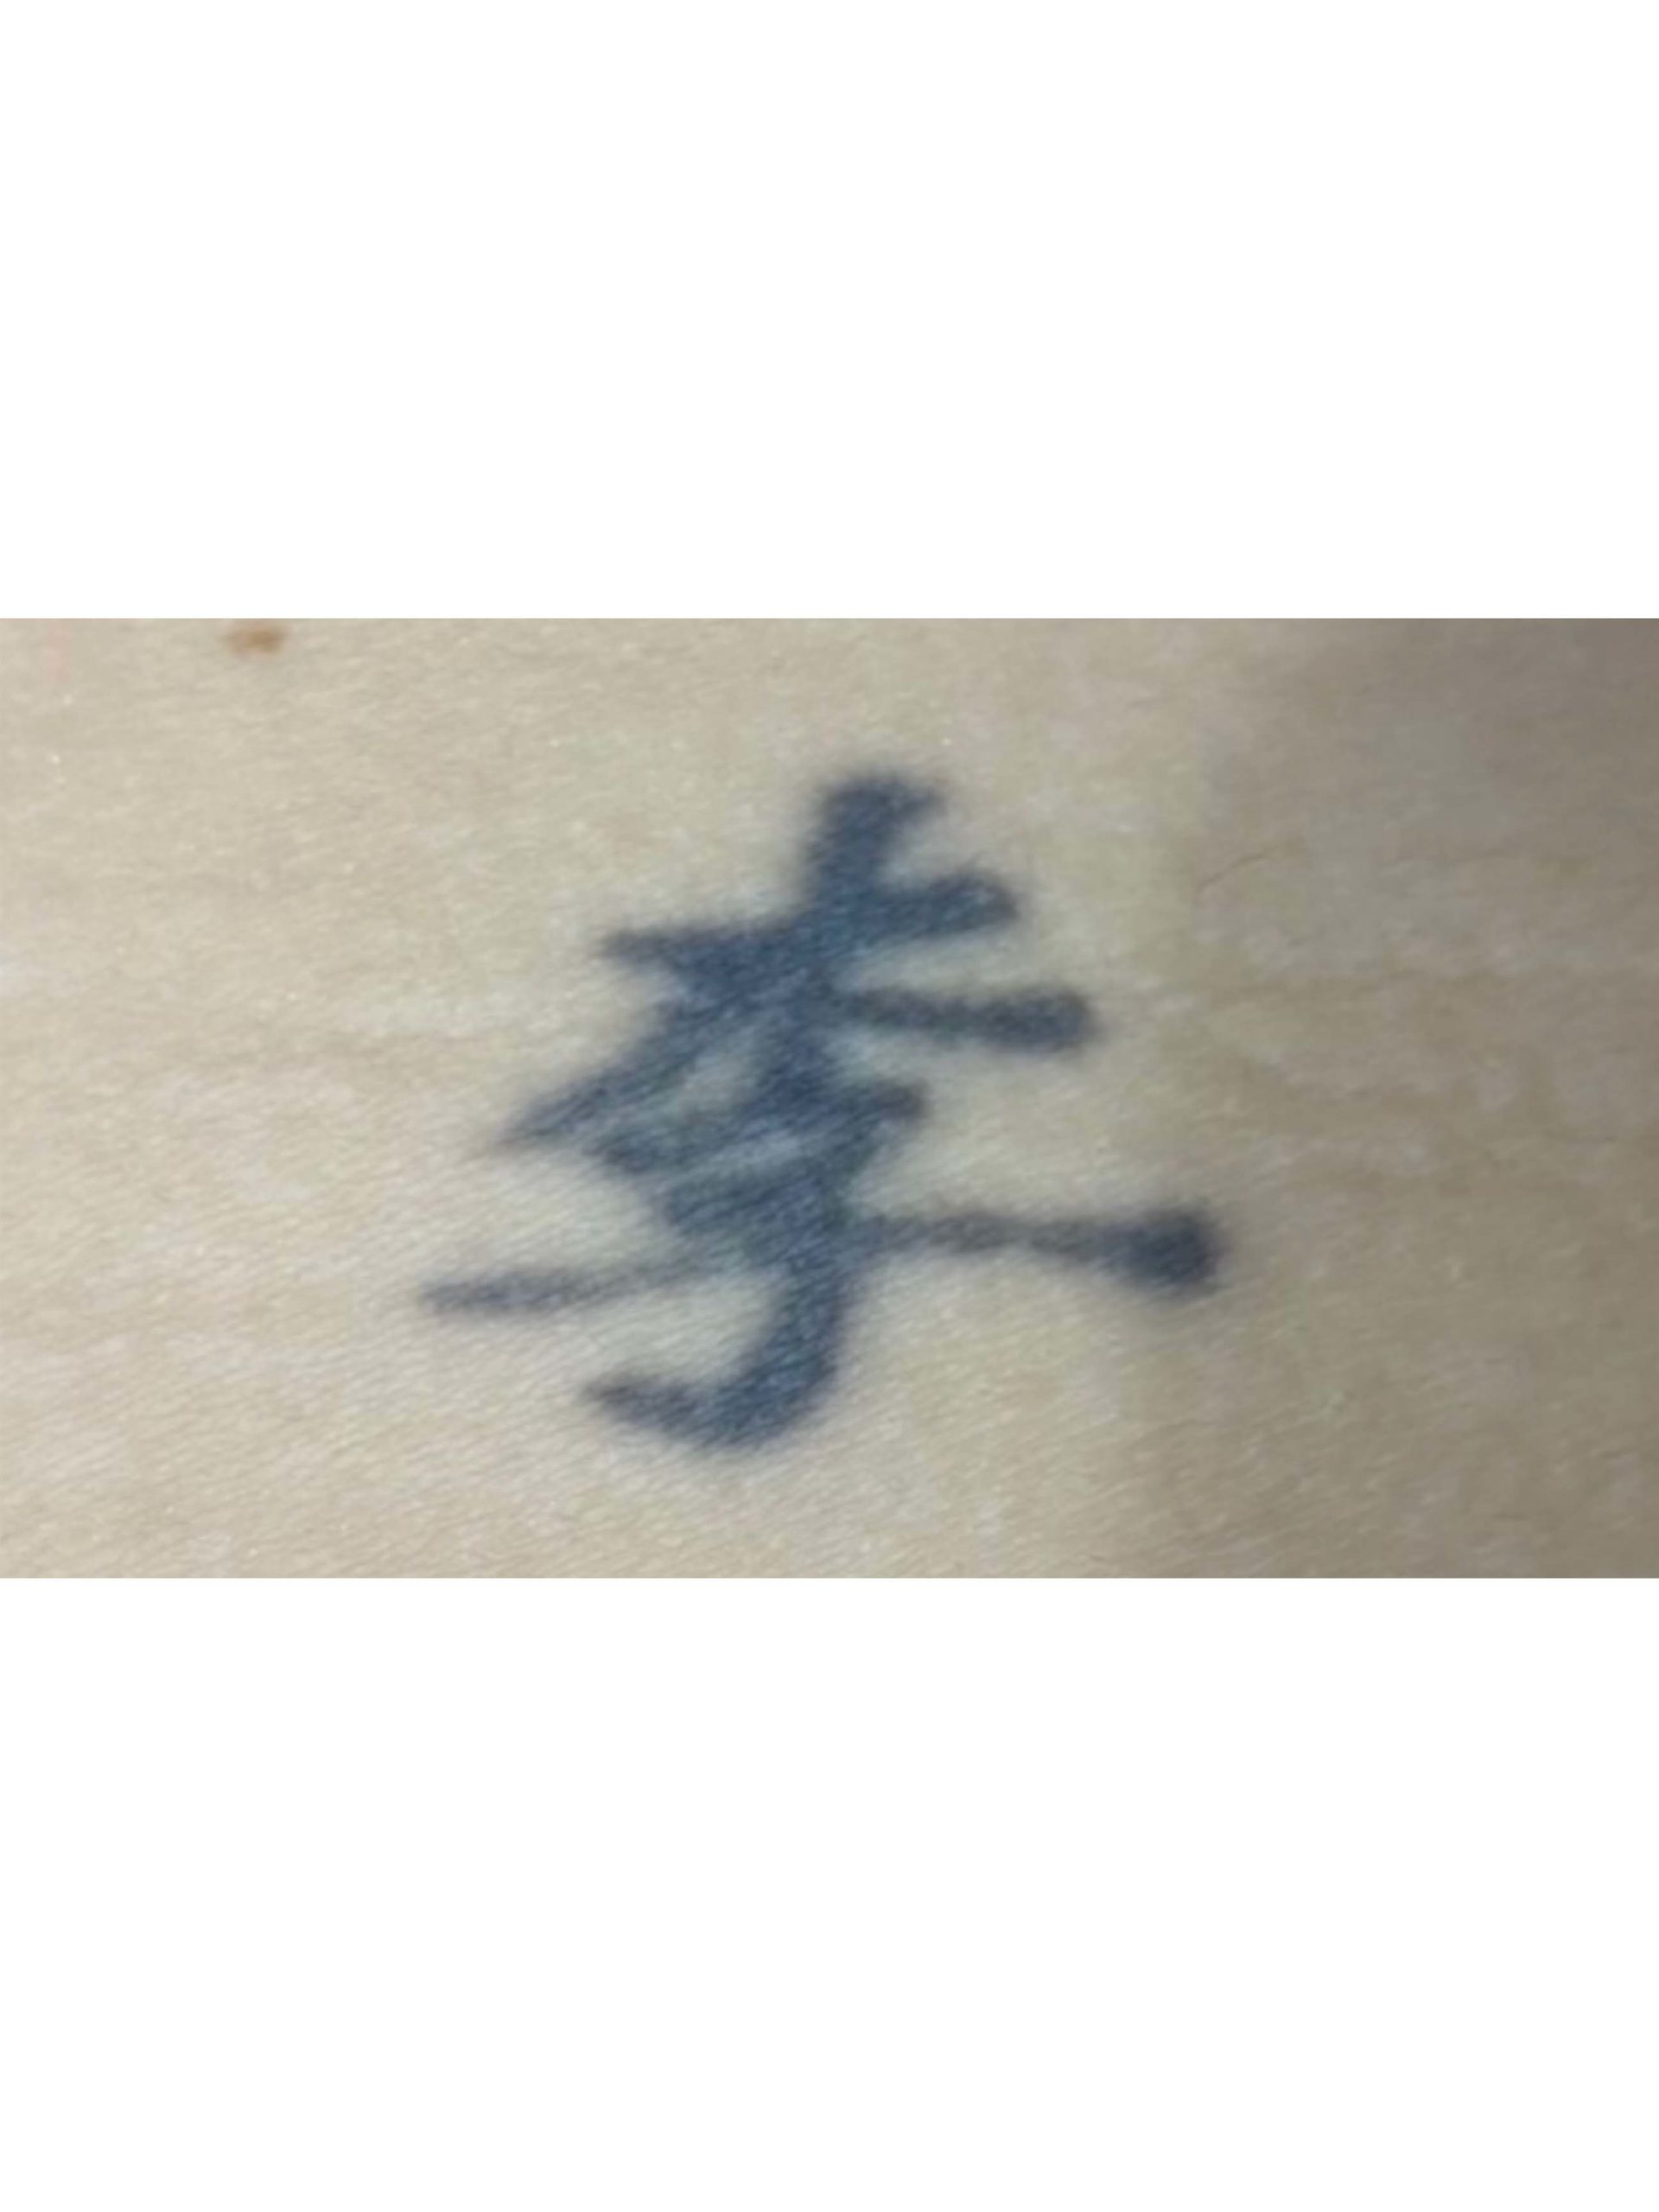 Tattoo Removal Before and After Photos